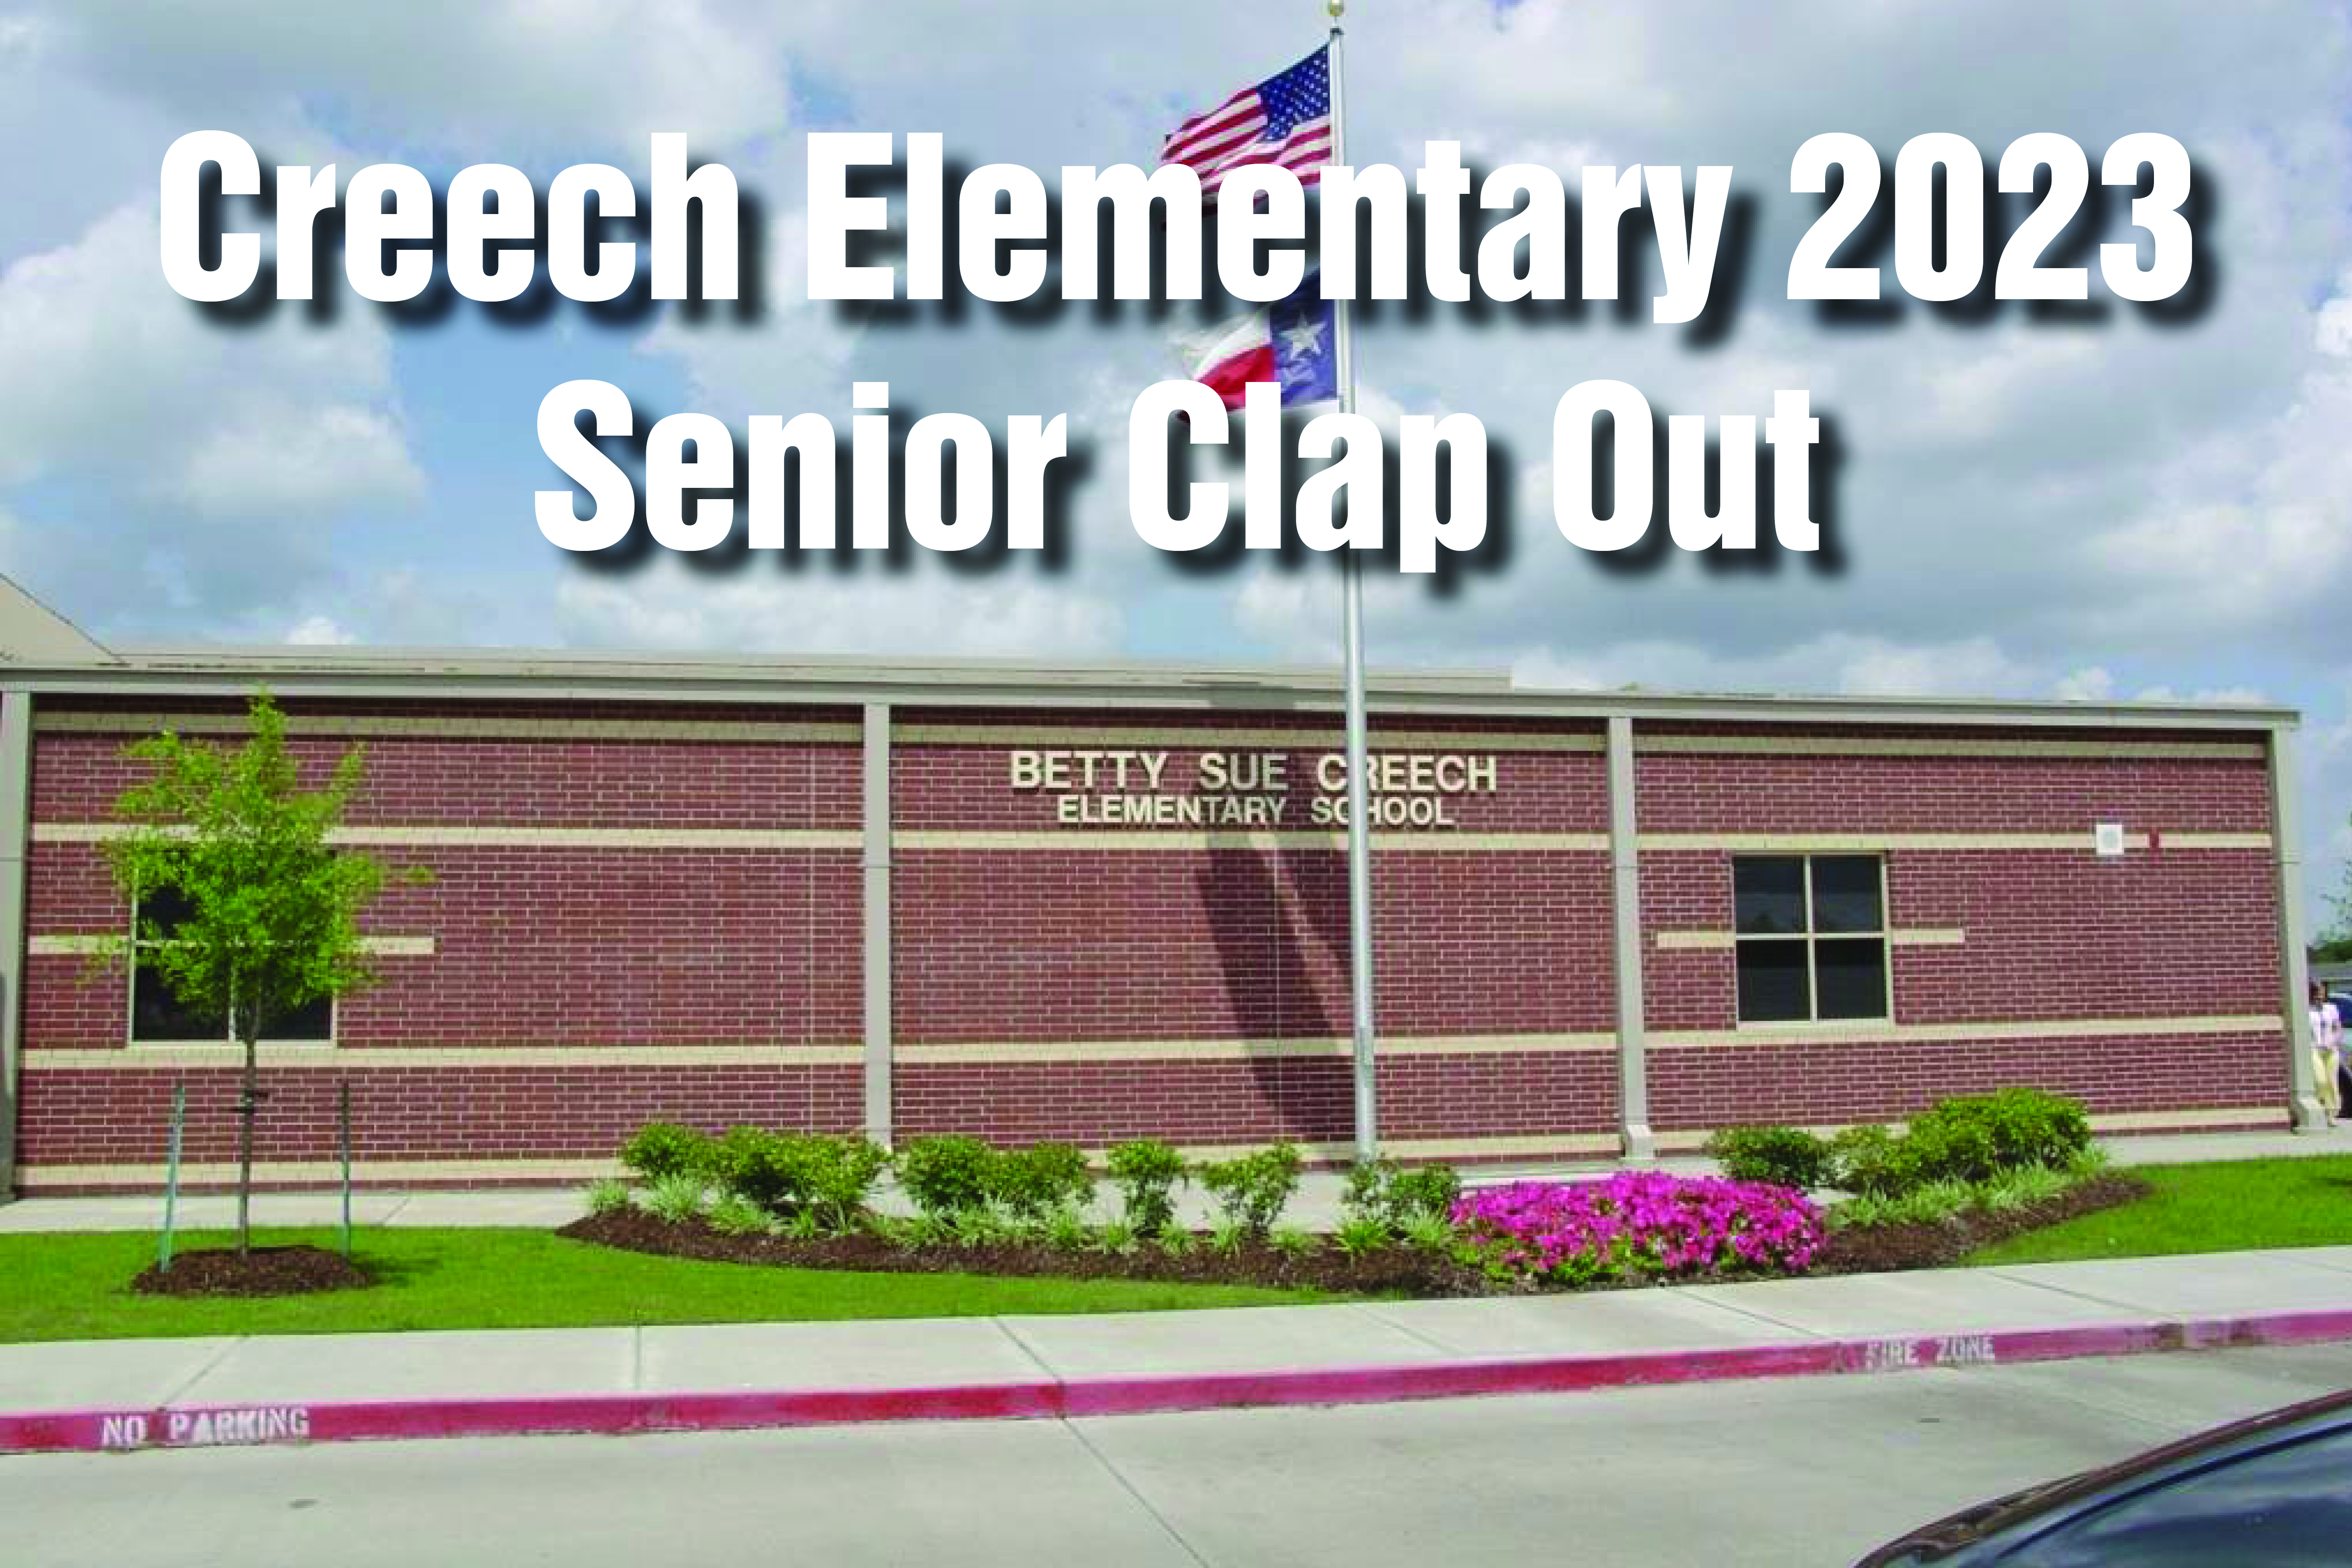 Creech Elementary Senior Clap Out - May 16th